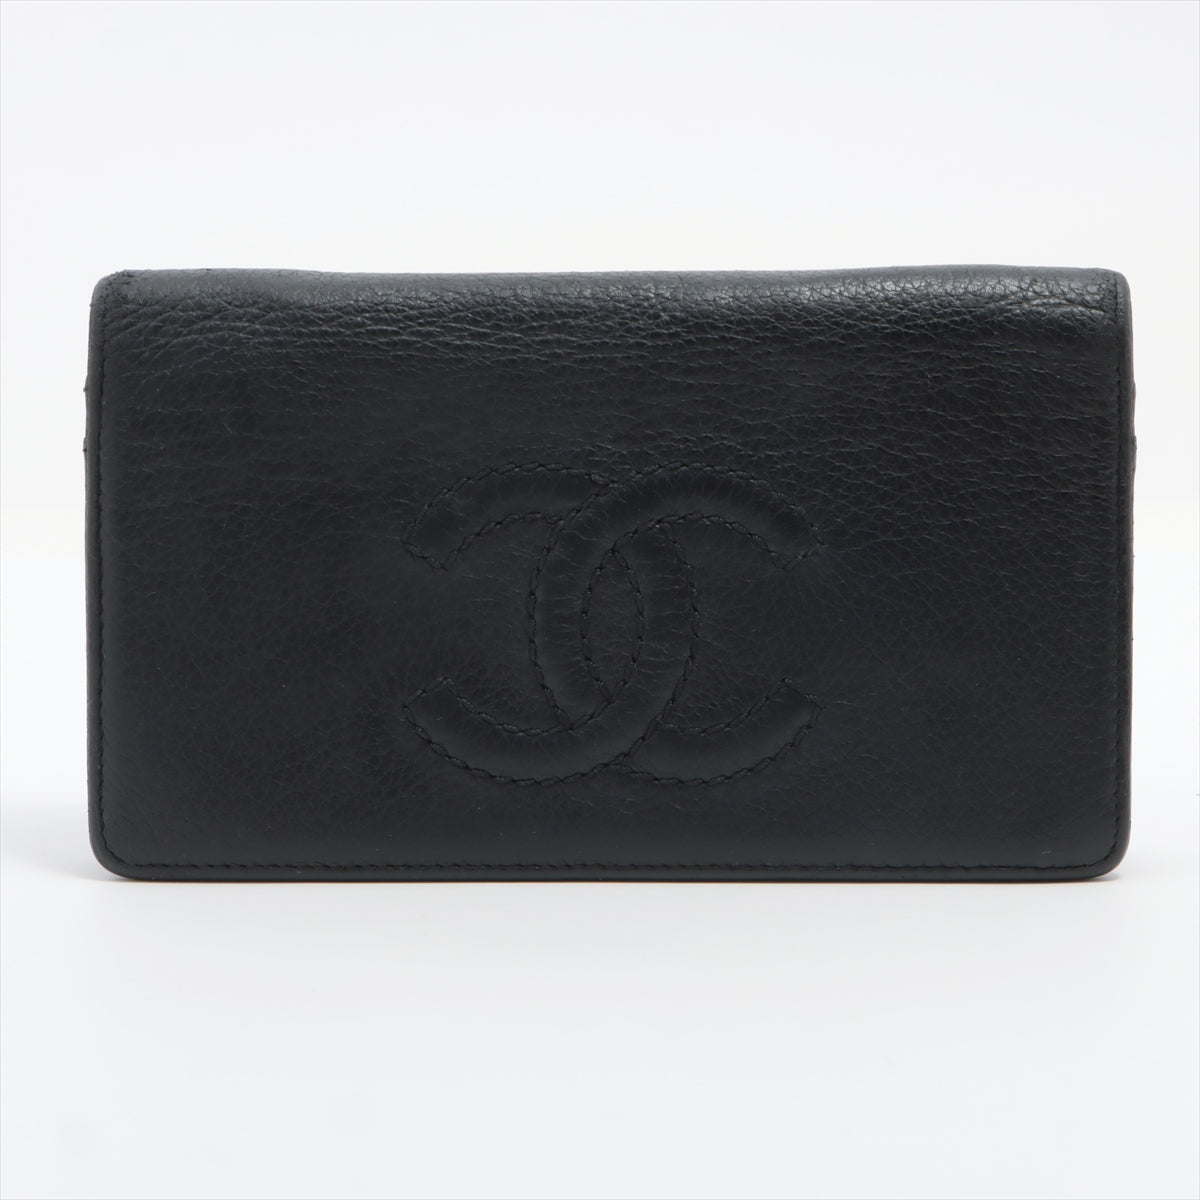 Chanel Coco Leather Wallet Black Silver Gold   Race Up Race Up